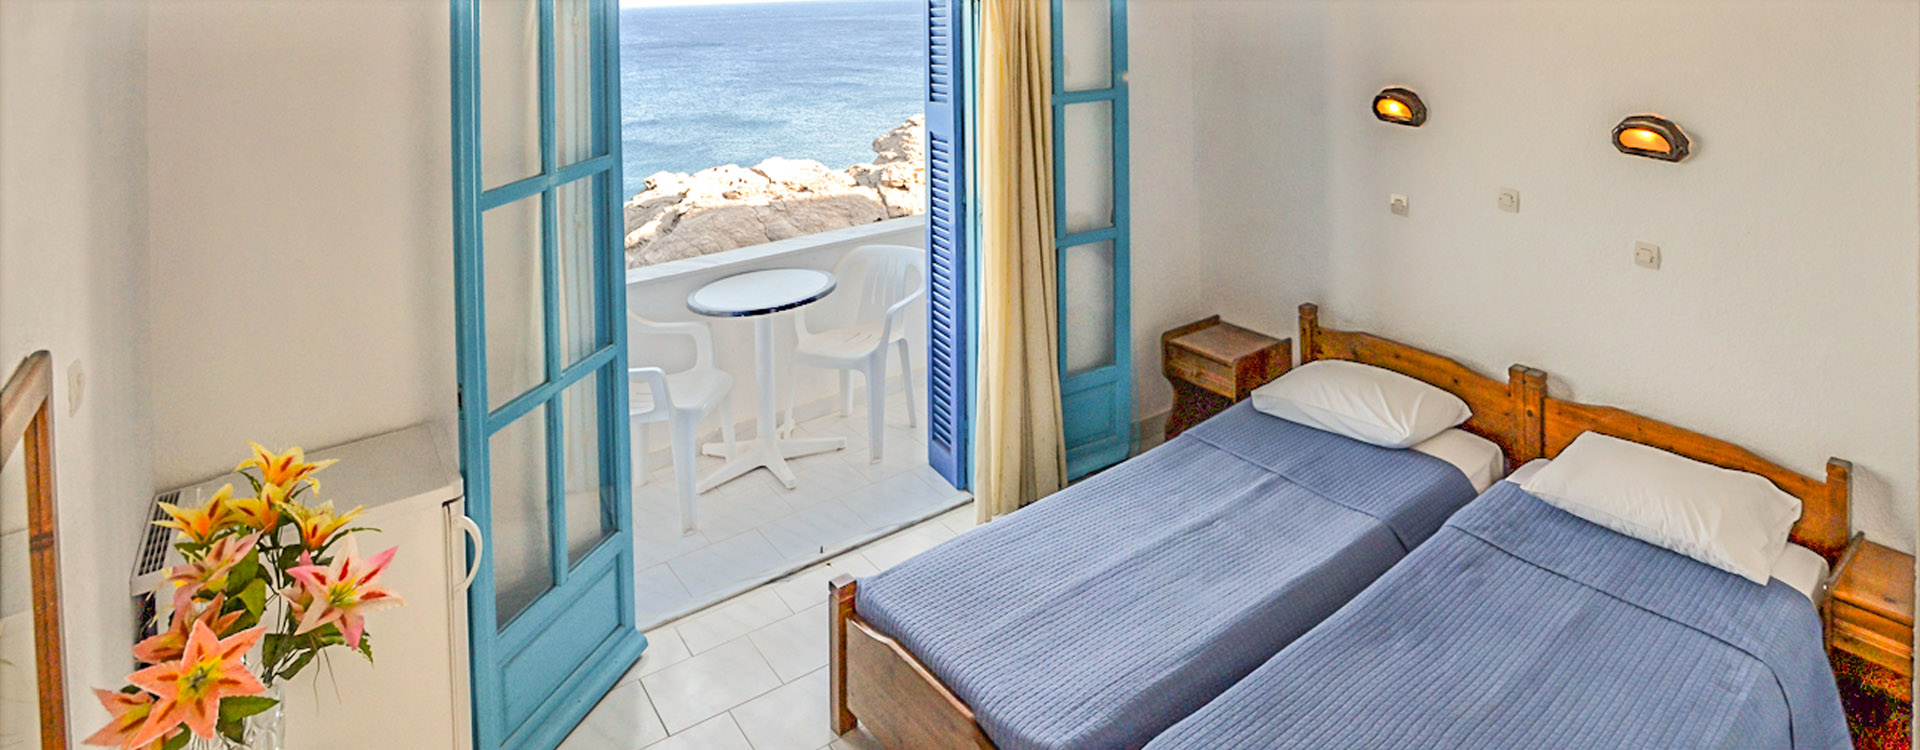 Fully furnished and equipped apartments with a view to the Aegean sea